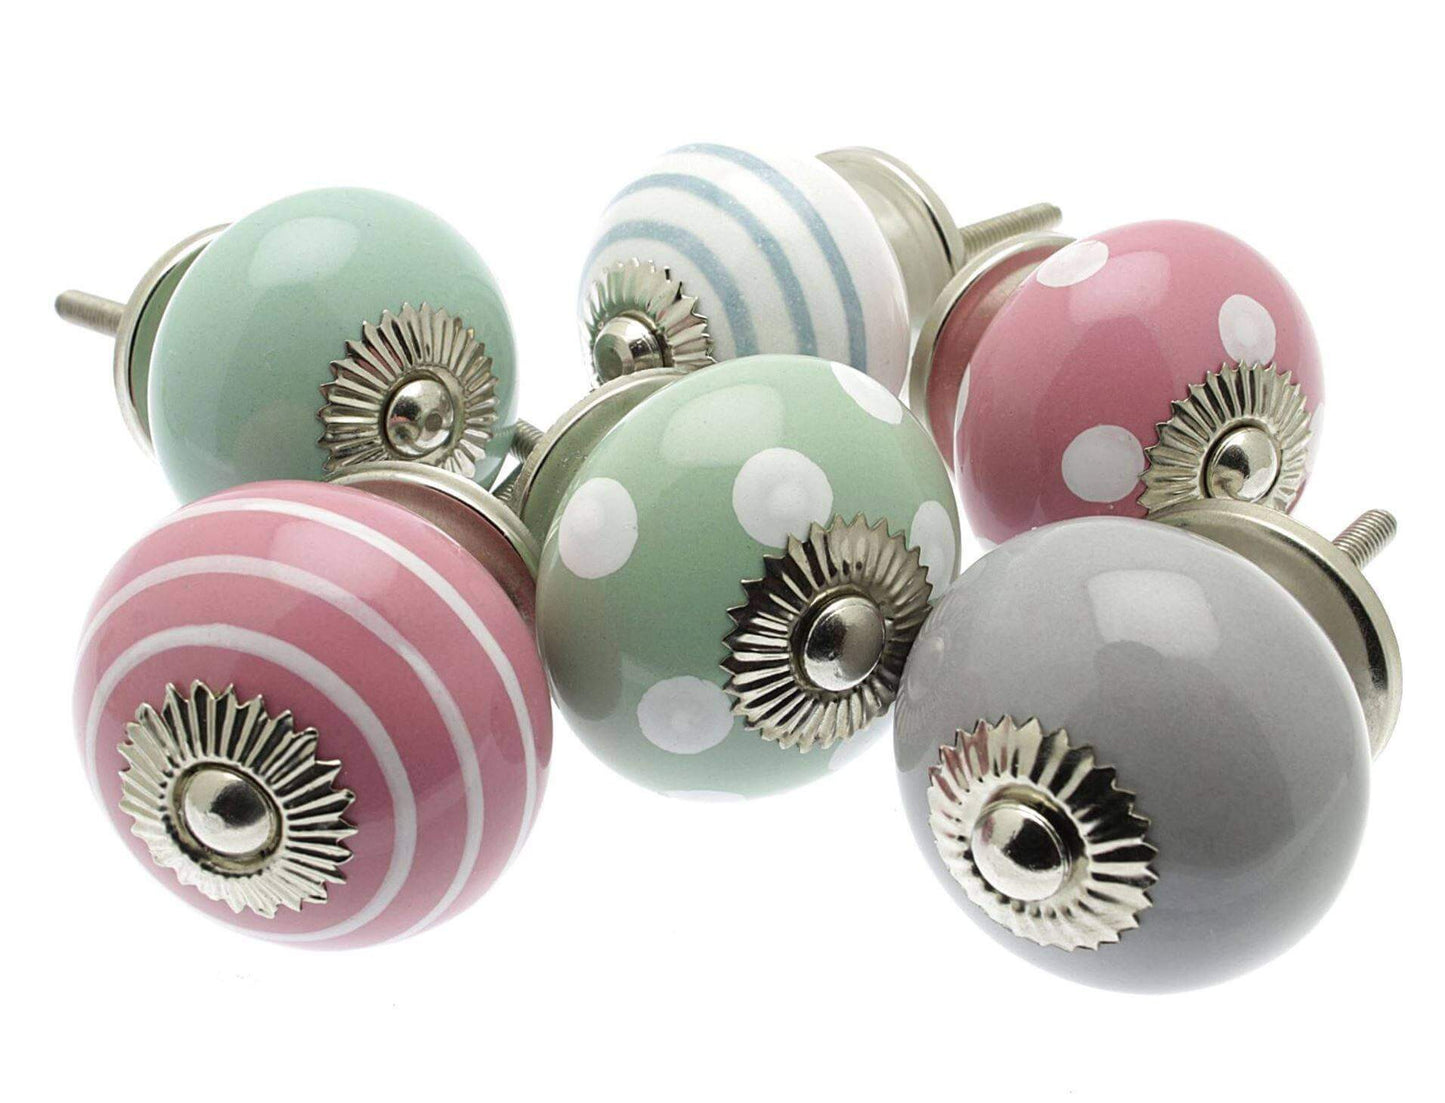 Ceramic Cupboard Knobs - Set Of 6 Eau De Nil And Mixed Pastel Ceramic Knobs (MG-604)